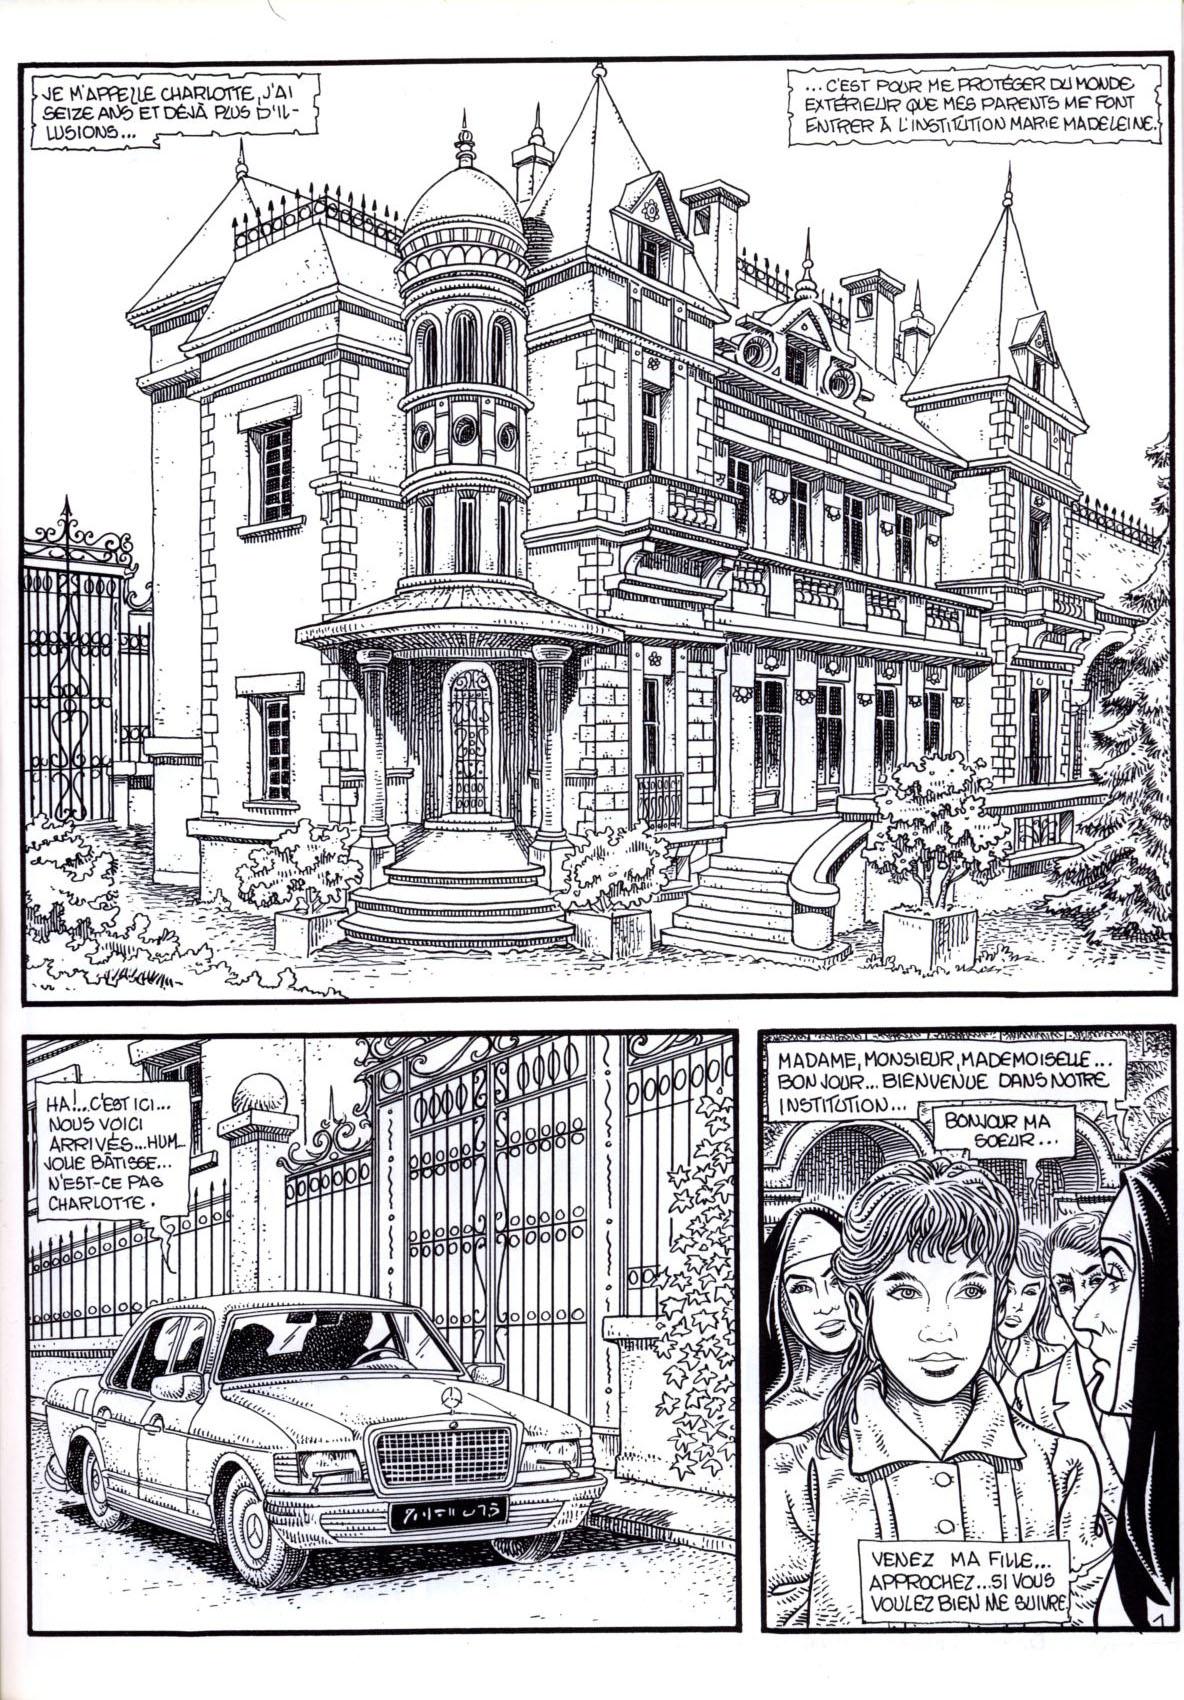 The Mary Magdalene Boarding School - Volume 3 numero d'image 3